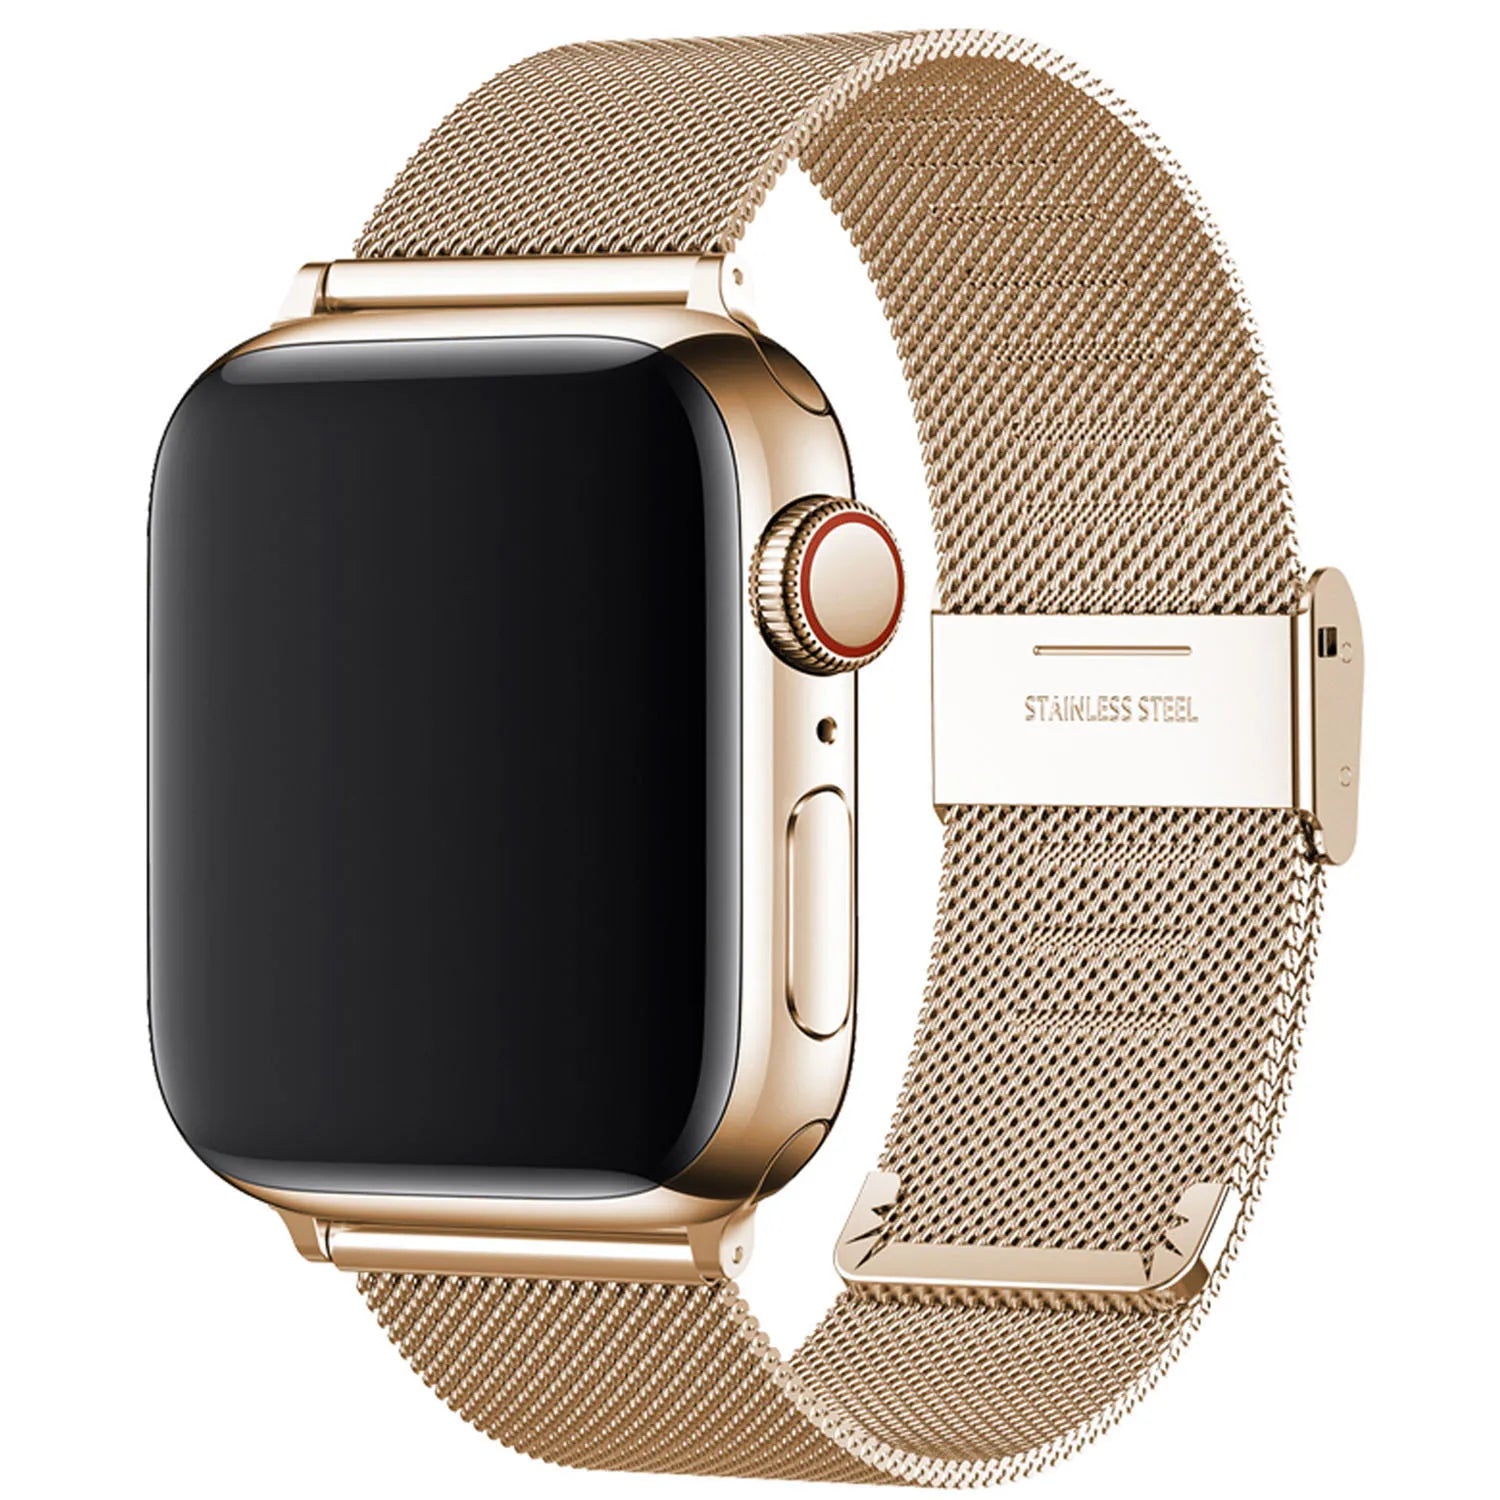 Milanese Strap For Apple Watch Band Stainless Steel iWatch